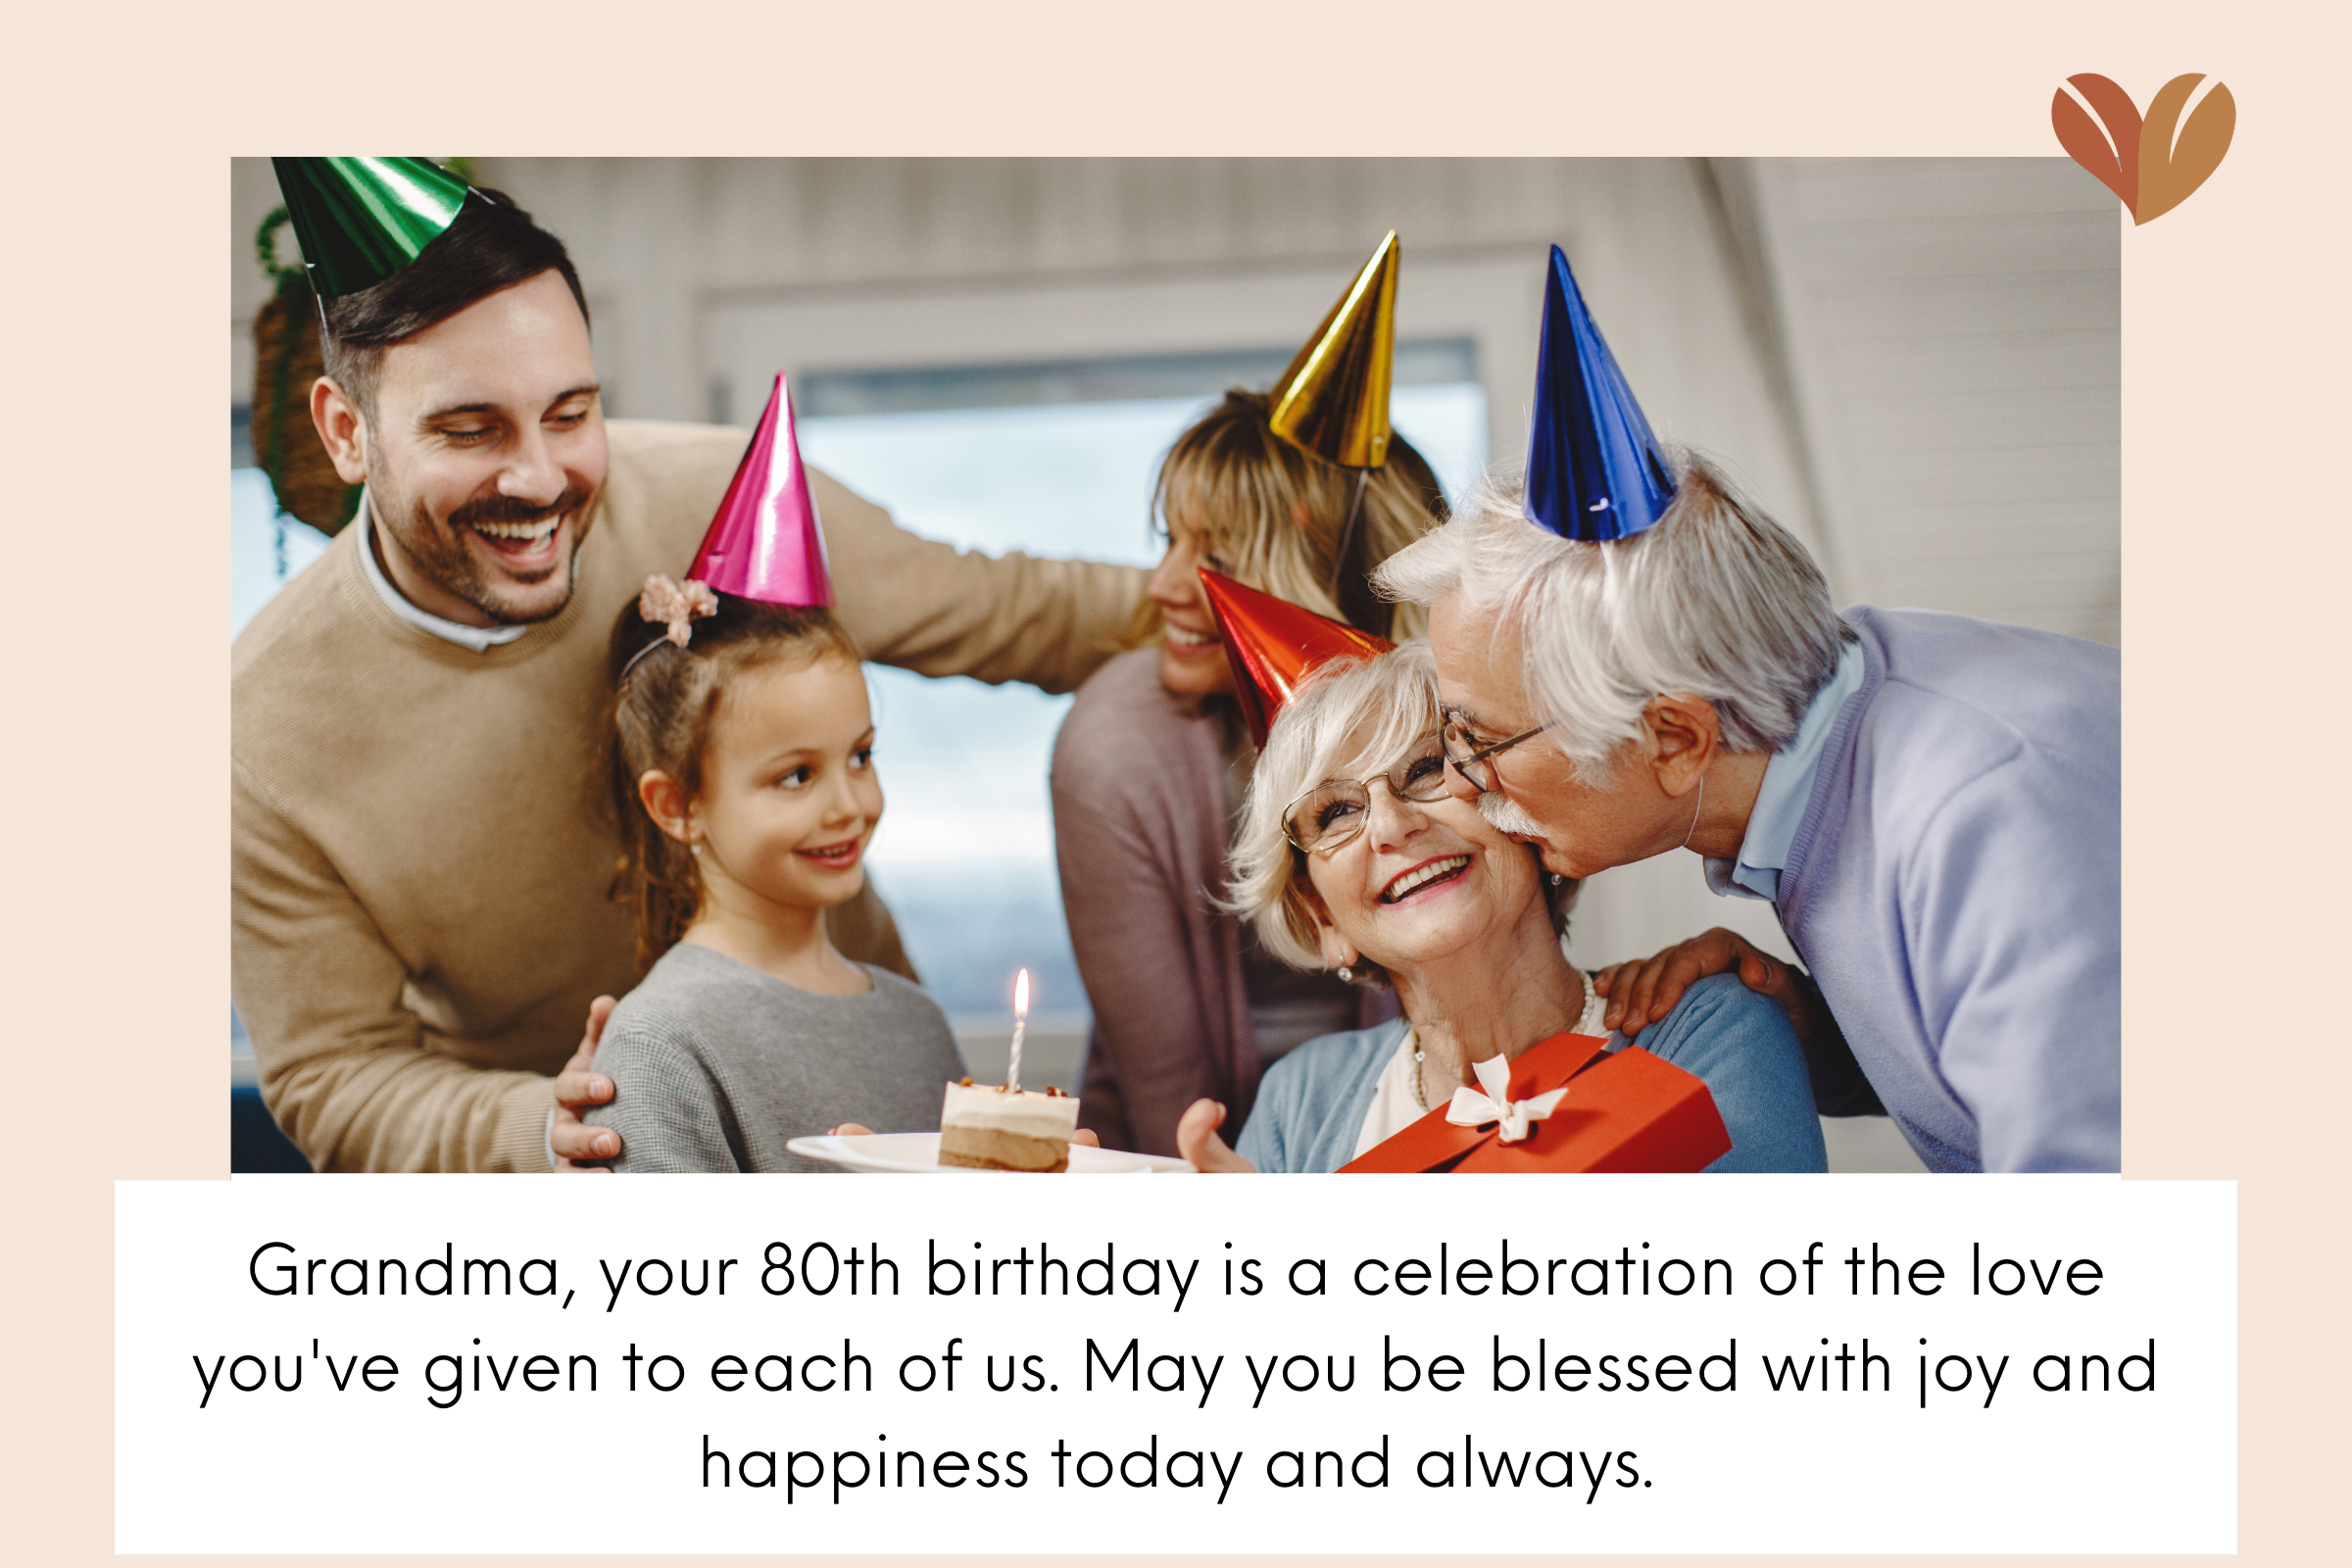 May this special day be filled with joy and laughter as we celebrate your 80th birthday. Happy wishes to you!